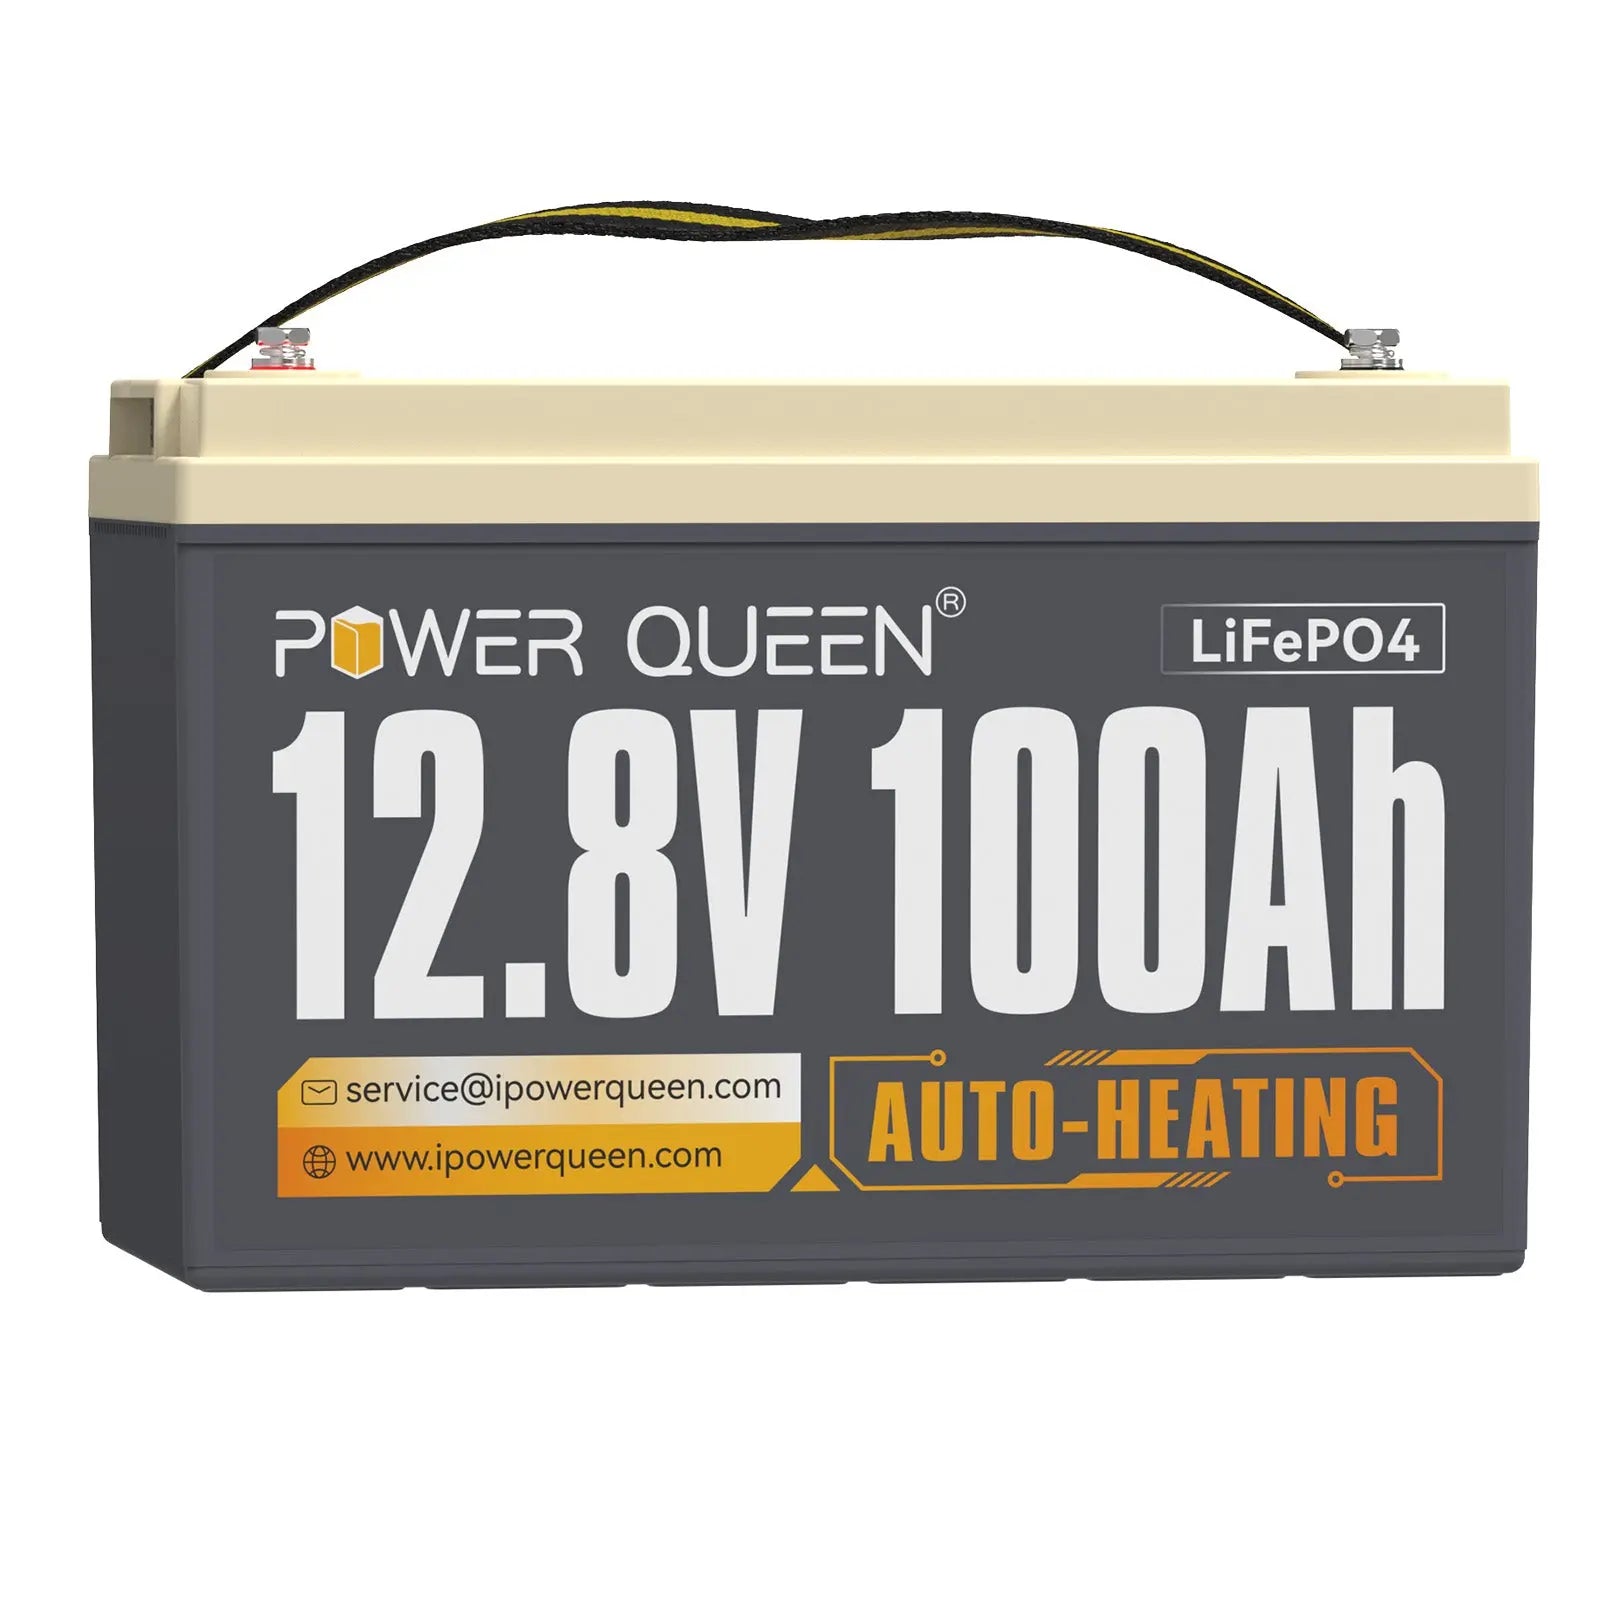 [Only $339.99]  Power Queen 12.8V 100Ah Self-Heating LiFePO4 Battery, Built-in 100A BMS, Match BCI Group 31 Battery Box Power Queen